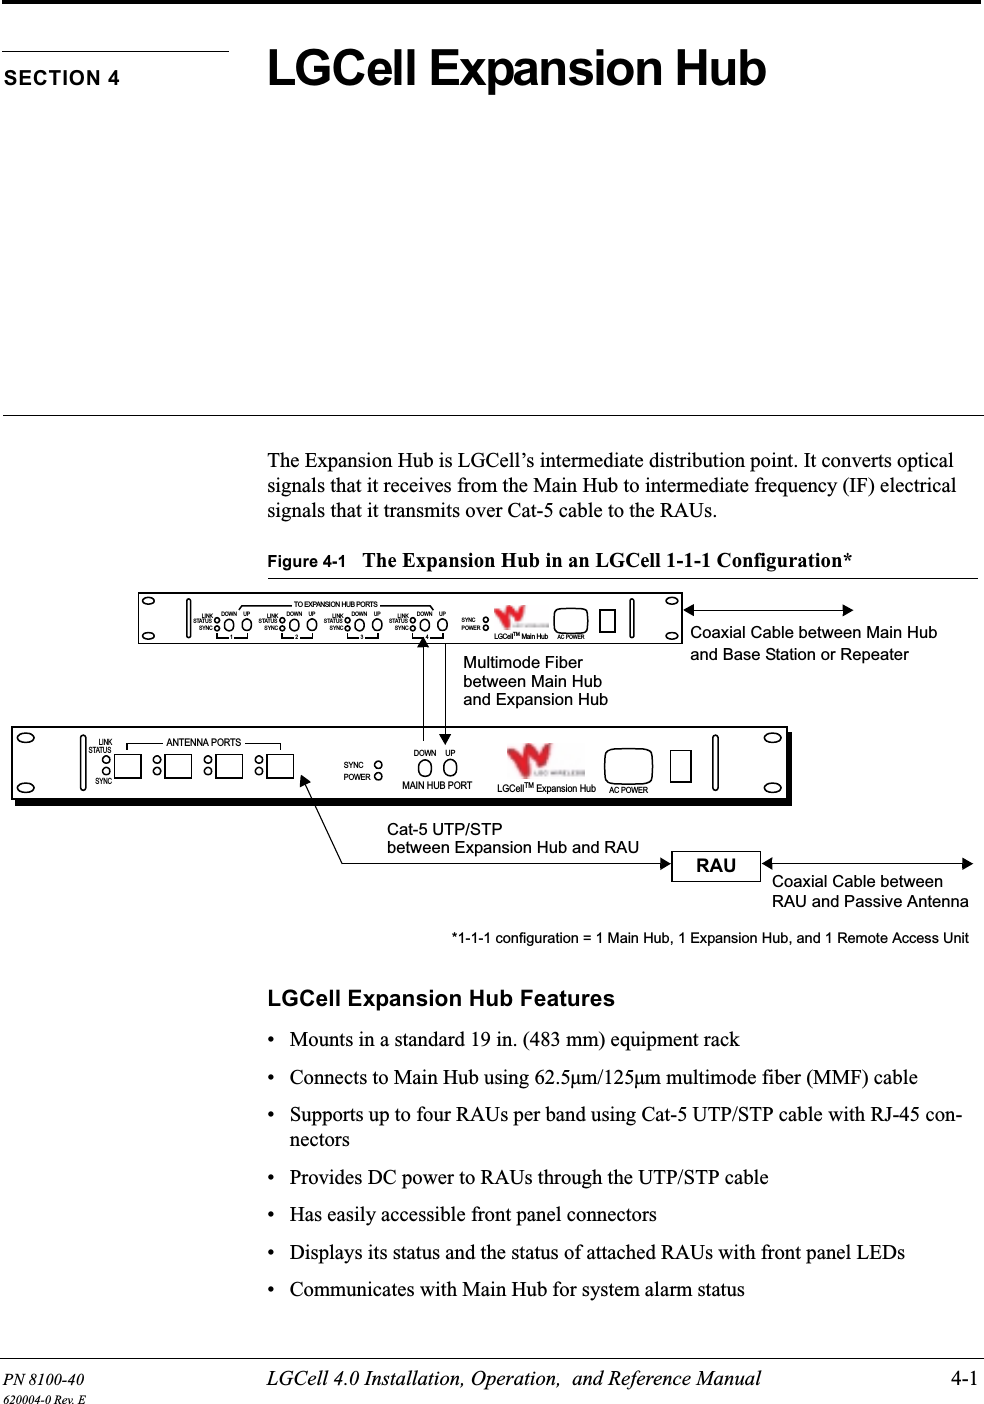 PN 8100-40 LGCell 4.0 Installation, Operation,  and Reference Manual 4-1620004-0 Rev. ESECTION 4 LGCell Expansion HubThe Expansion Hub is LGCell’s intermediate distribution point. It converts optical signals that it receives from the Main Hub to intermediate frequency (IF) electrical signals that it transmits over Cat-5 cable to the RAUs.Figure 4-1 The Expansion Hub in an LGCell 1-1-1 Configuration*LGCell Expansion Hub Features• Mounts in a standard 19 in. (483 mm) equipment rack• Connects to Main Hub using 62.5µm/125µm multimode fiber (MMF) cable• Supports up to four RAUs per band using Cat-5 UTP/STP cable with RJ-45 con-nectors• Provides DC power to RAUs through the UTP/STP cable• Has easily accessible front panel connectors• Displays its status and the status of attached RAUs with front panel LEDs• Communicates with Main Hub for system alarm statusRAUMultimode Fiberbetween Main Huband Expansion HubCat-5 UTP/STPbetween Expansion Hub and RAUand Base Station or RepeaterCoaxial Cable betweenCoaxial Cable between Main HubAC POWERLGCellTM Main HubSYNCPOWERLINKSYNCSTATUSDOWN UP1LINKSYNCSTATUSDOWN UP2LINKSYNCSTATUSDOWN UP3LINKSYNCSTATUSDOWN UP4TO EXPANSION HUB PORTSAC POWERLGCellTM Expansion HubSYNCPOWERSYNCLINKSTATUSANTENNA PORTSDOWN UPMAIN HUB PORTRAU and Passive Antenna*1-1-1 configuration = 1 Main Hub, 1 Expansion Hub, and 1 Remote Access Unit